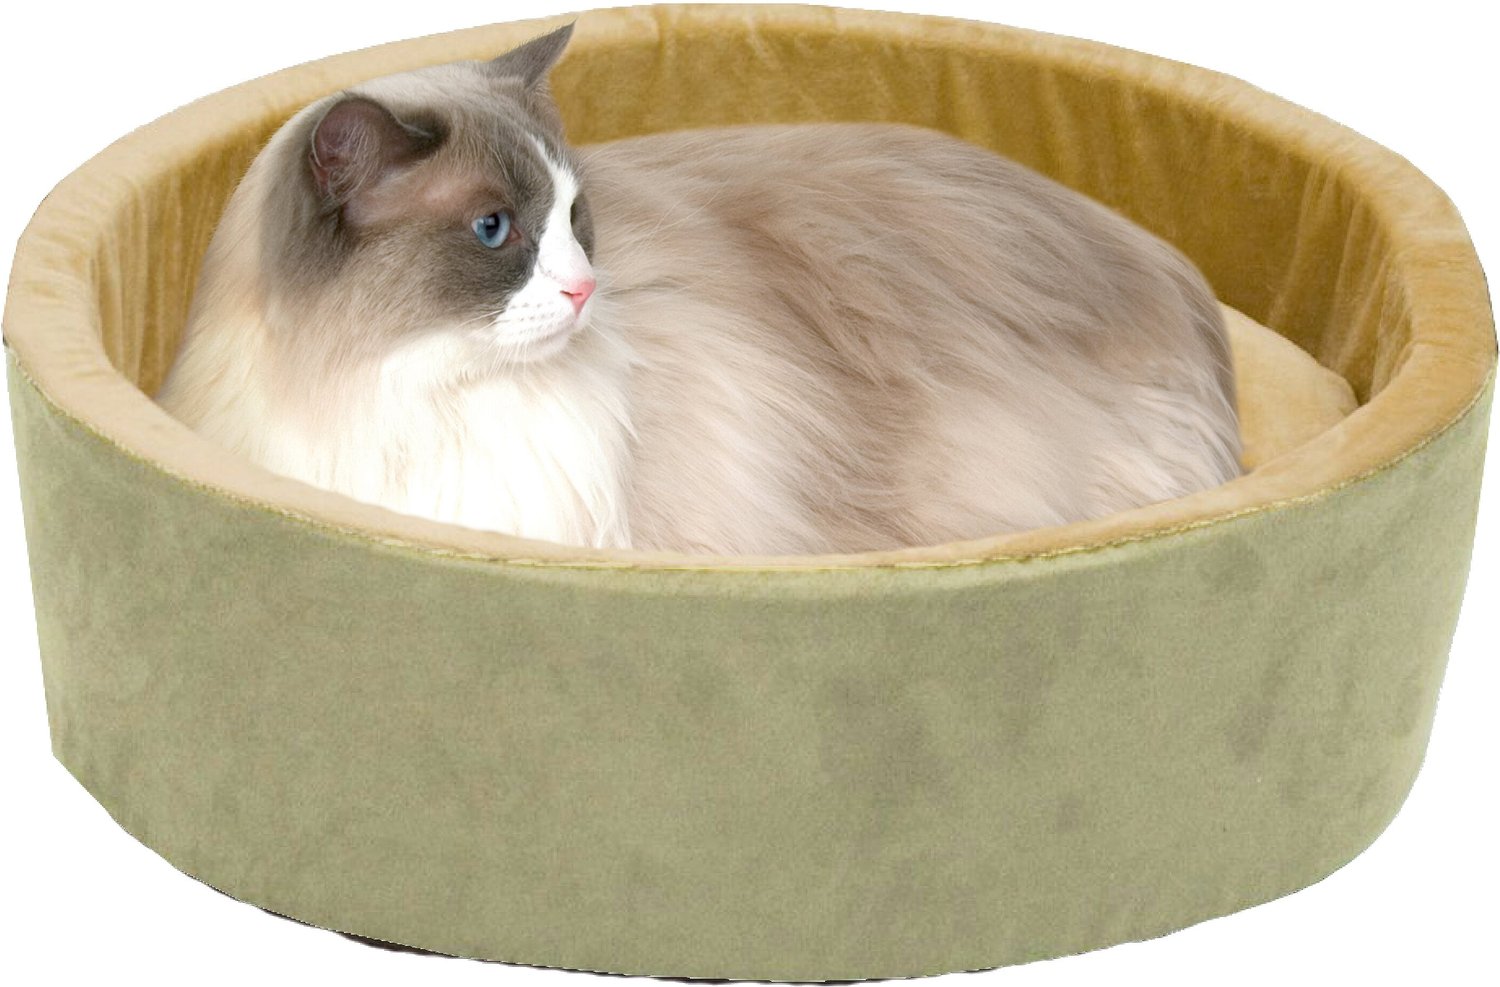 K\u0026H PET PRODUCTS Thermo-Kitty Cat Bed 